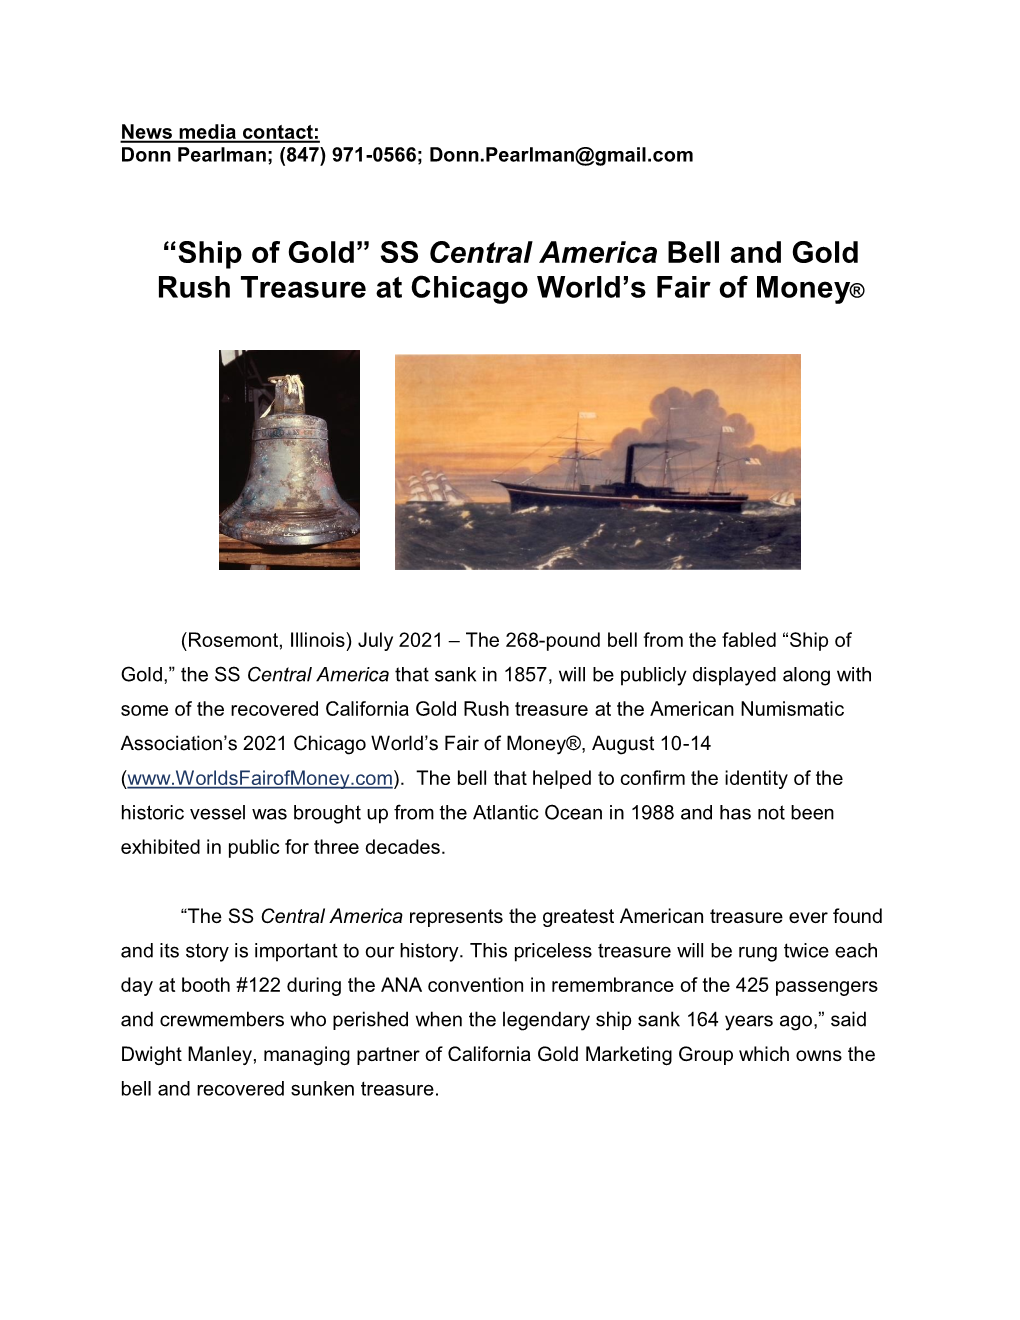 “Ship of Gold” SS Central America Bell and Gold Rush Treasure at Chicago World’S Fair of Money®